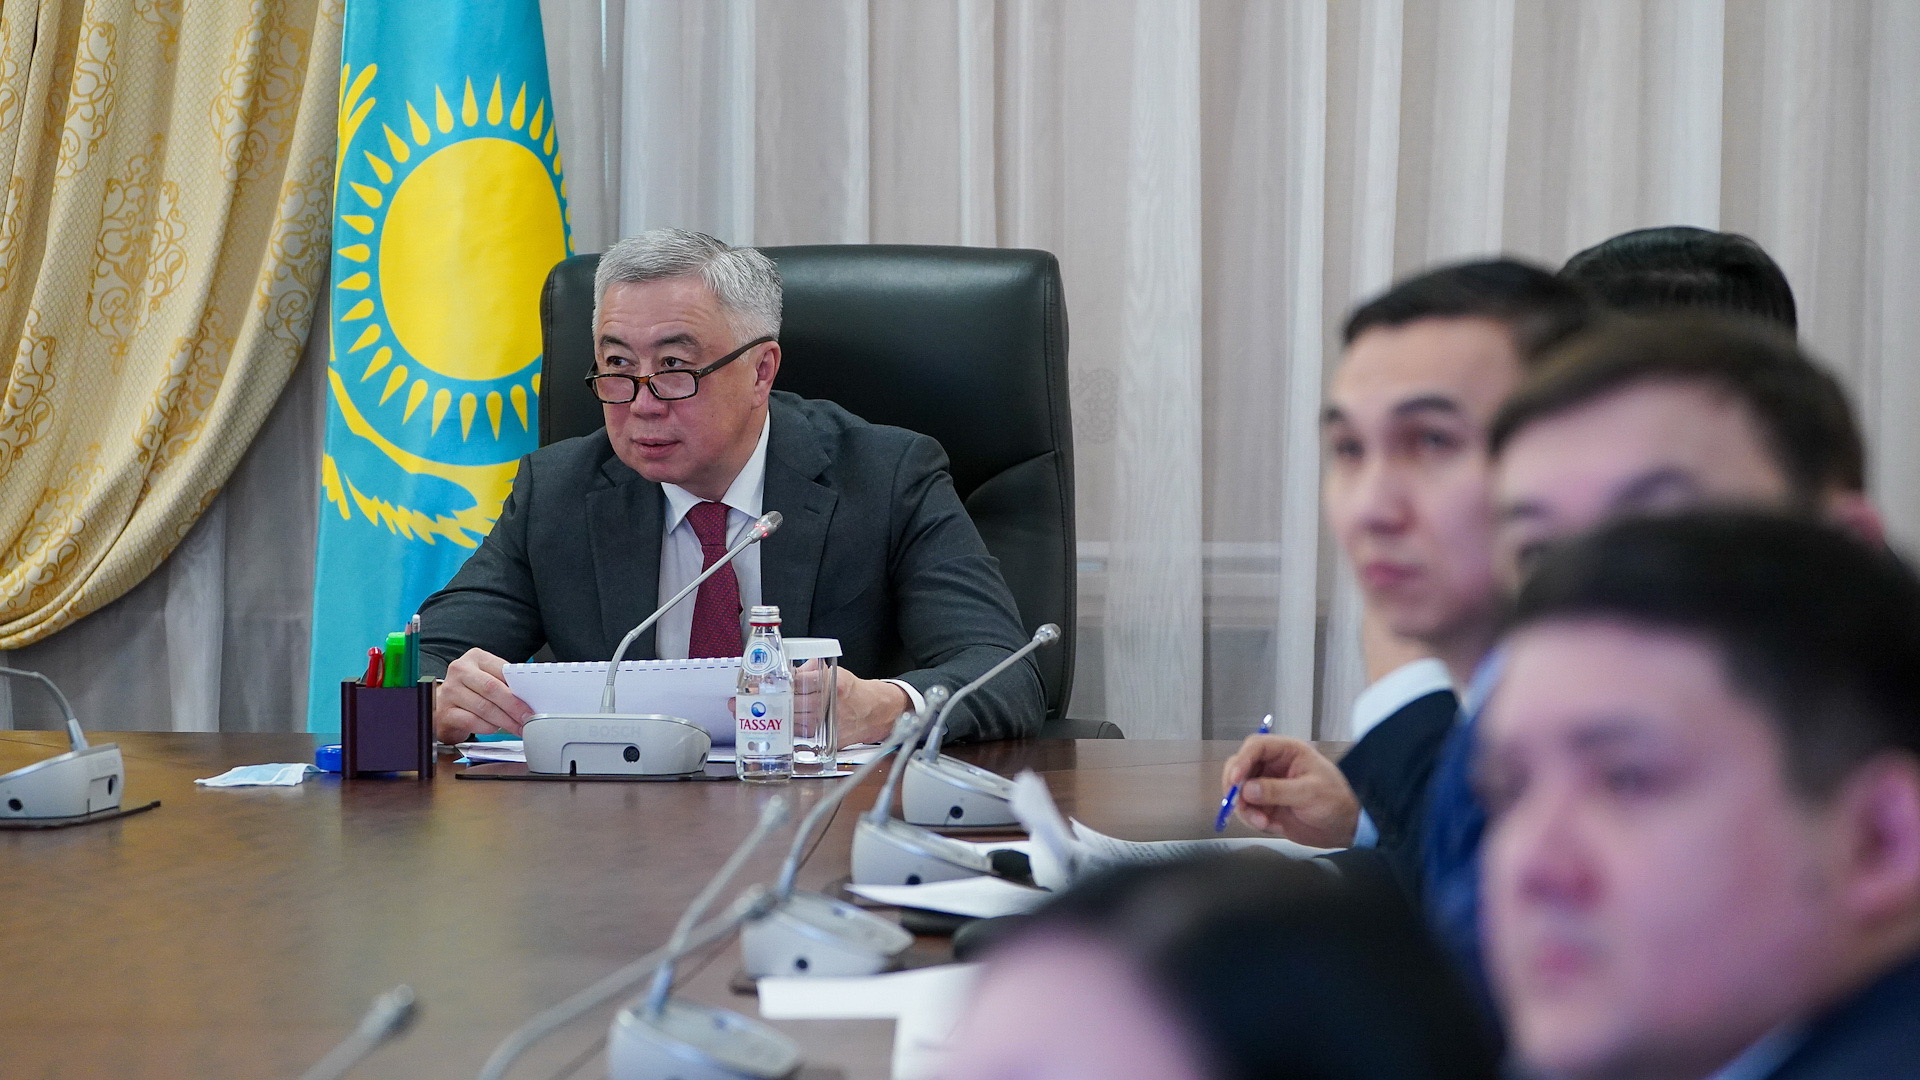 Areas of oilseeds, fodder crops and sugar beet will be increased in Kazakhstan